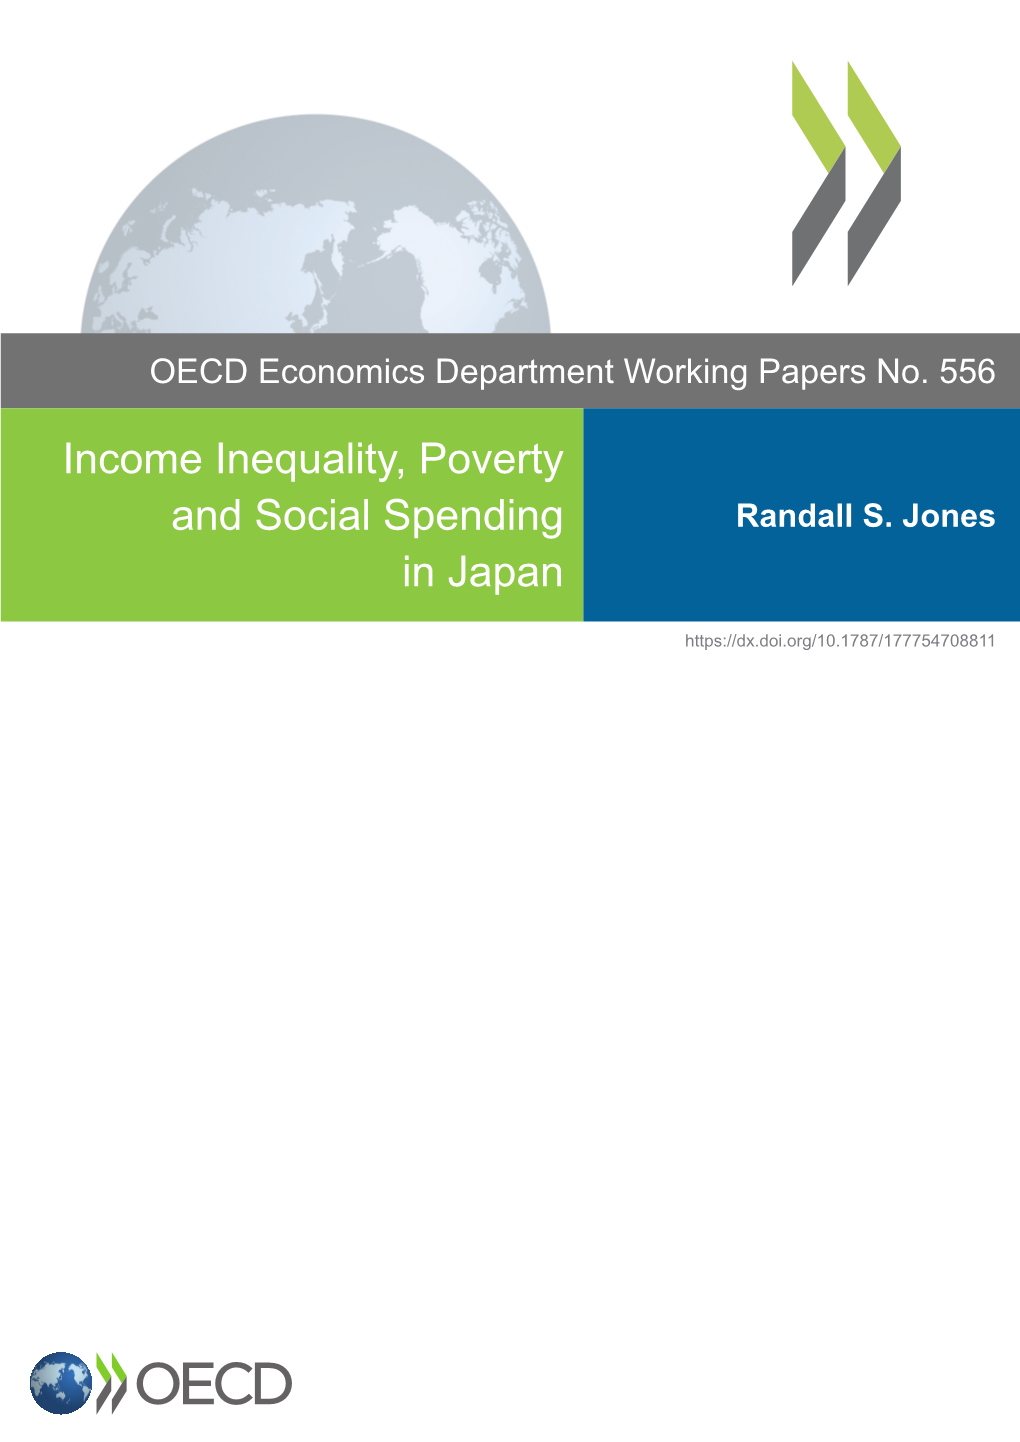 Income Inequality, Poverty and Social Spending in Japan